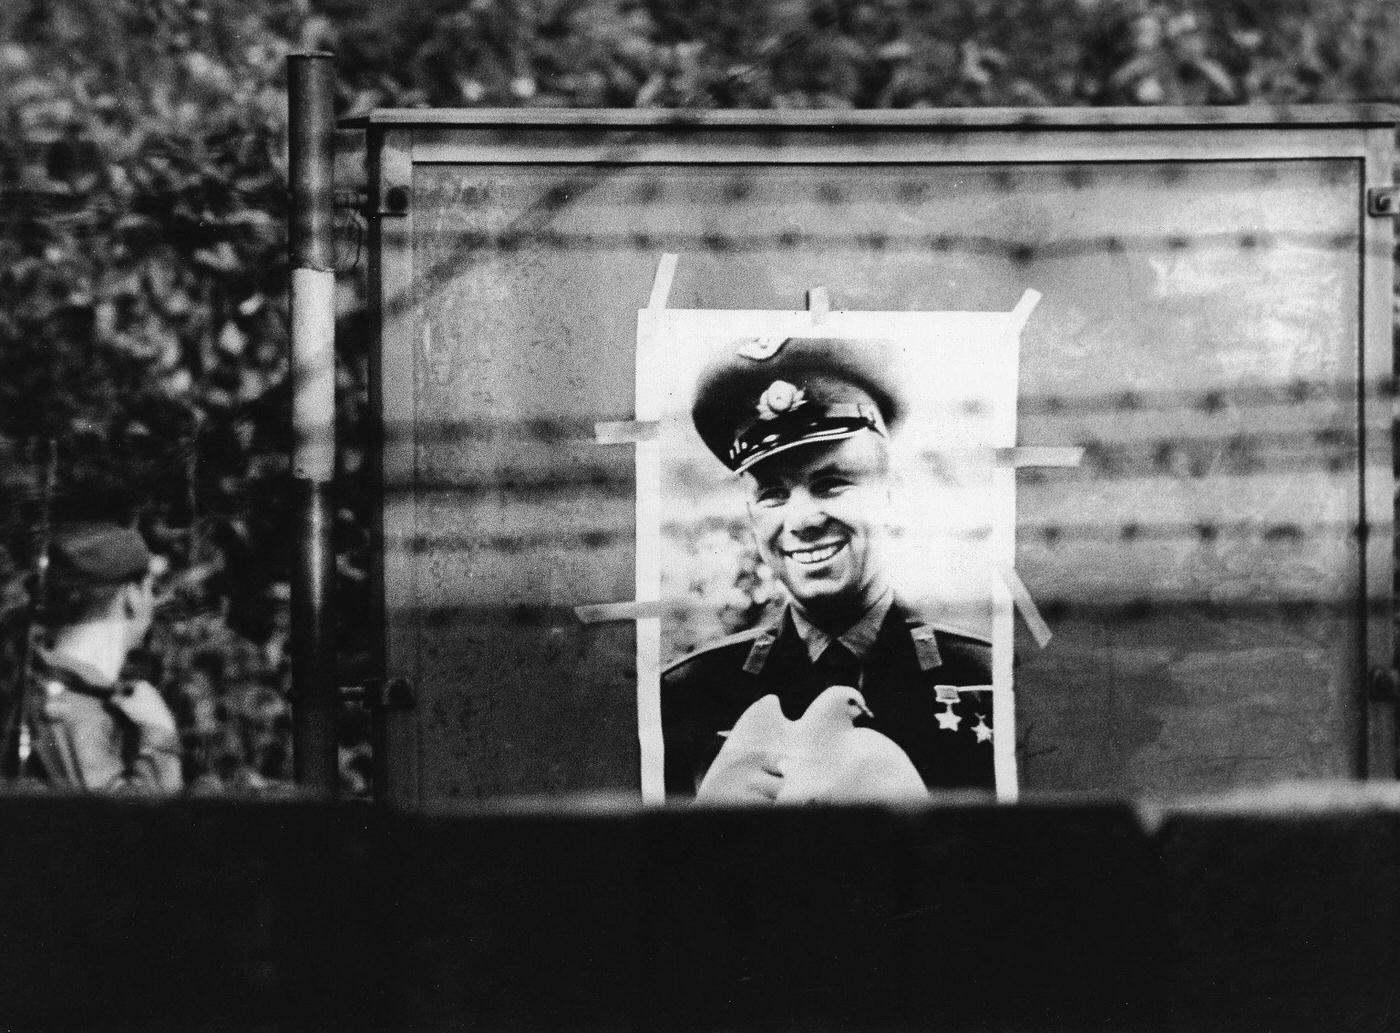 Poster of Juri Gagarin at the entrance to a tunnel in Wedding, 1961